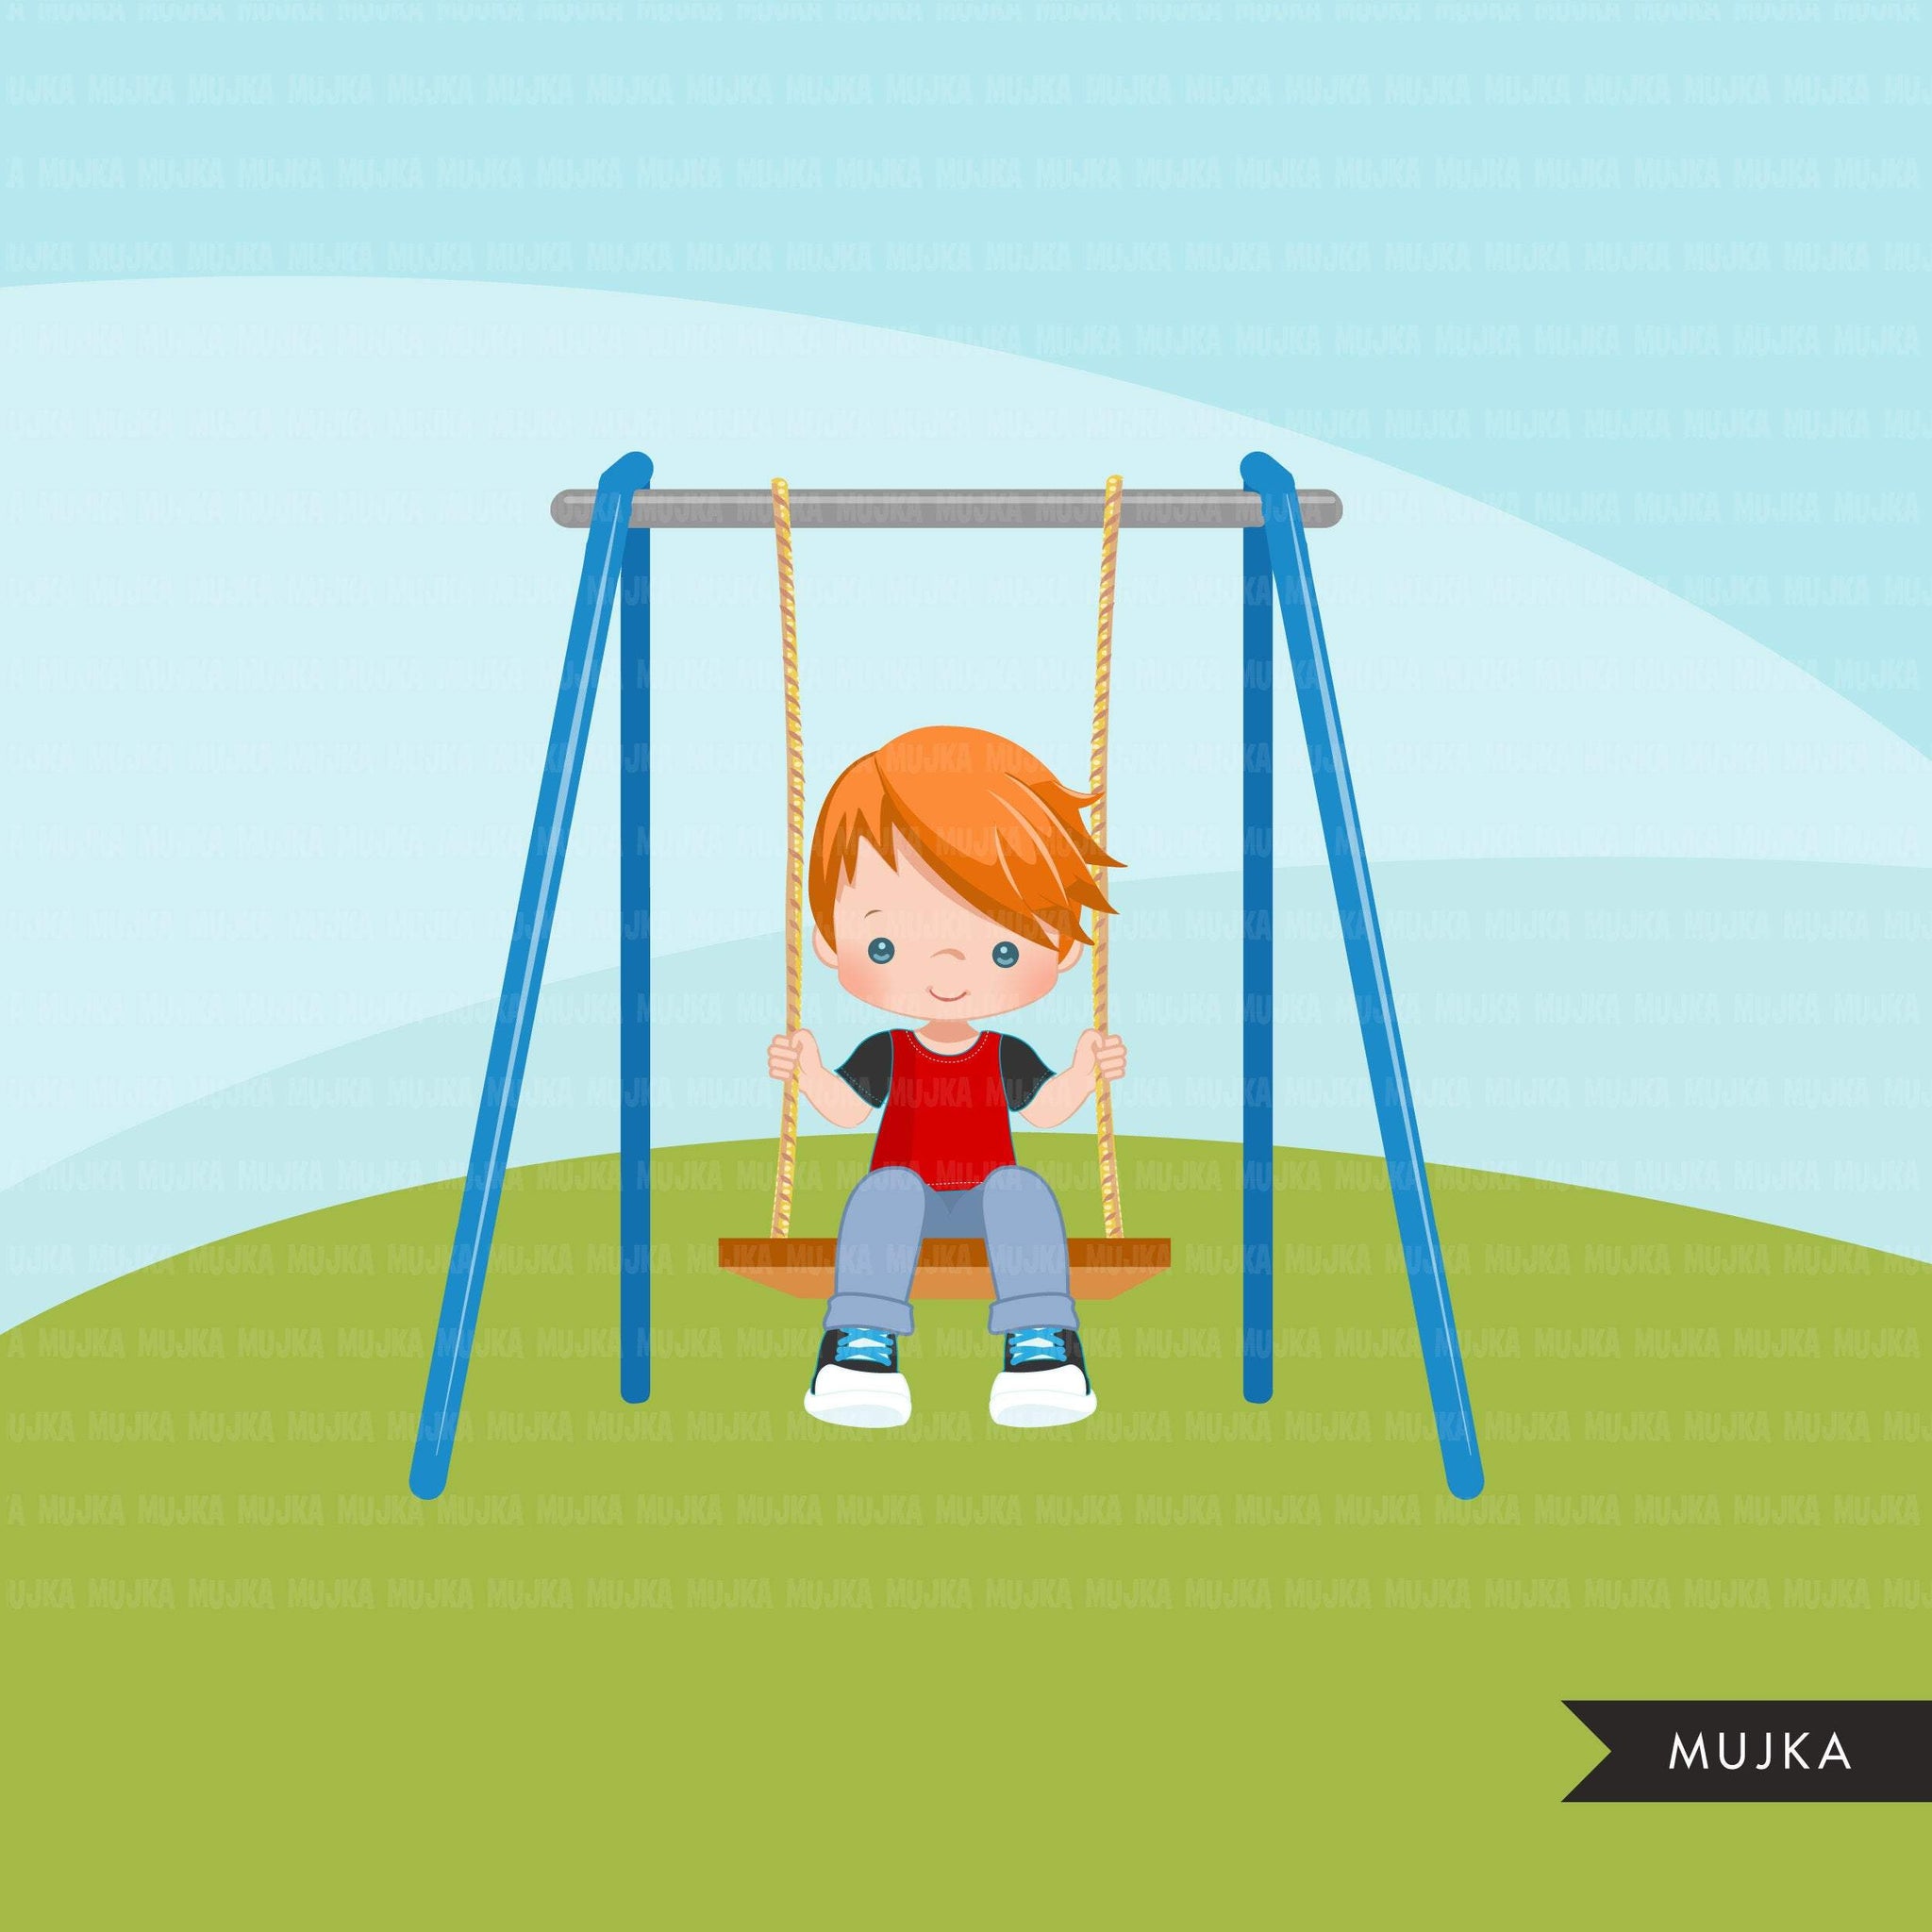 Playground Clipart, boy swinging, spring, outdoors park swing graphics, commercial use Png clip art